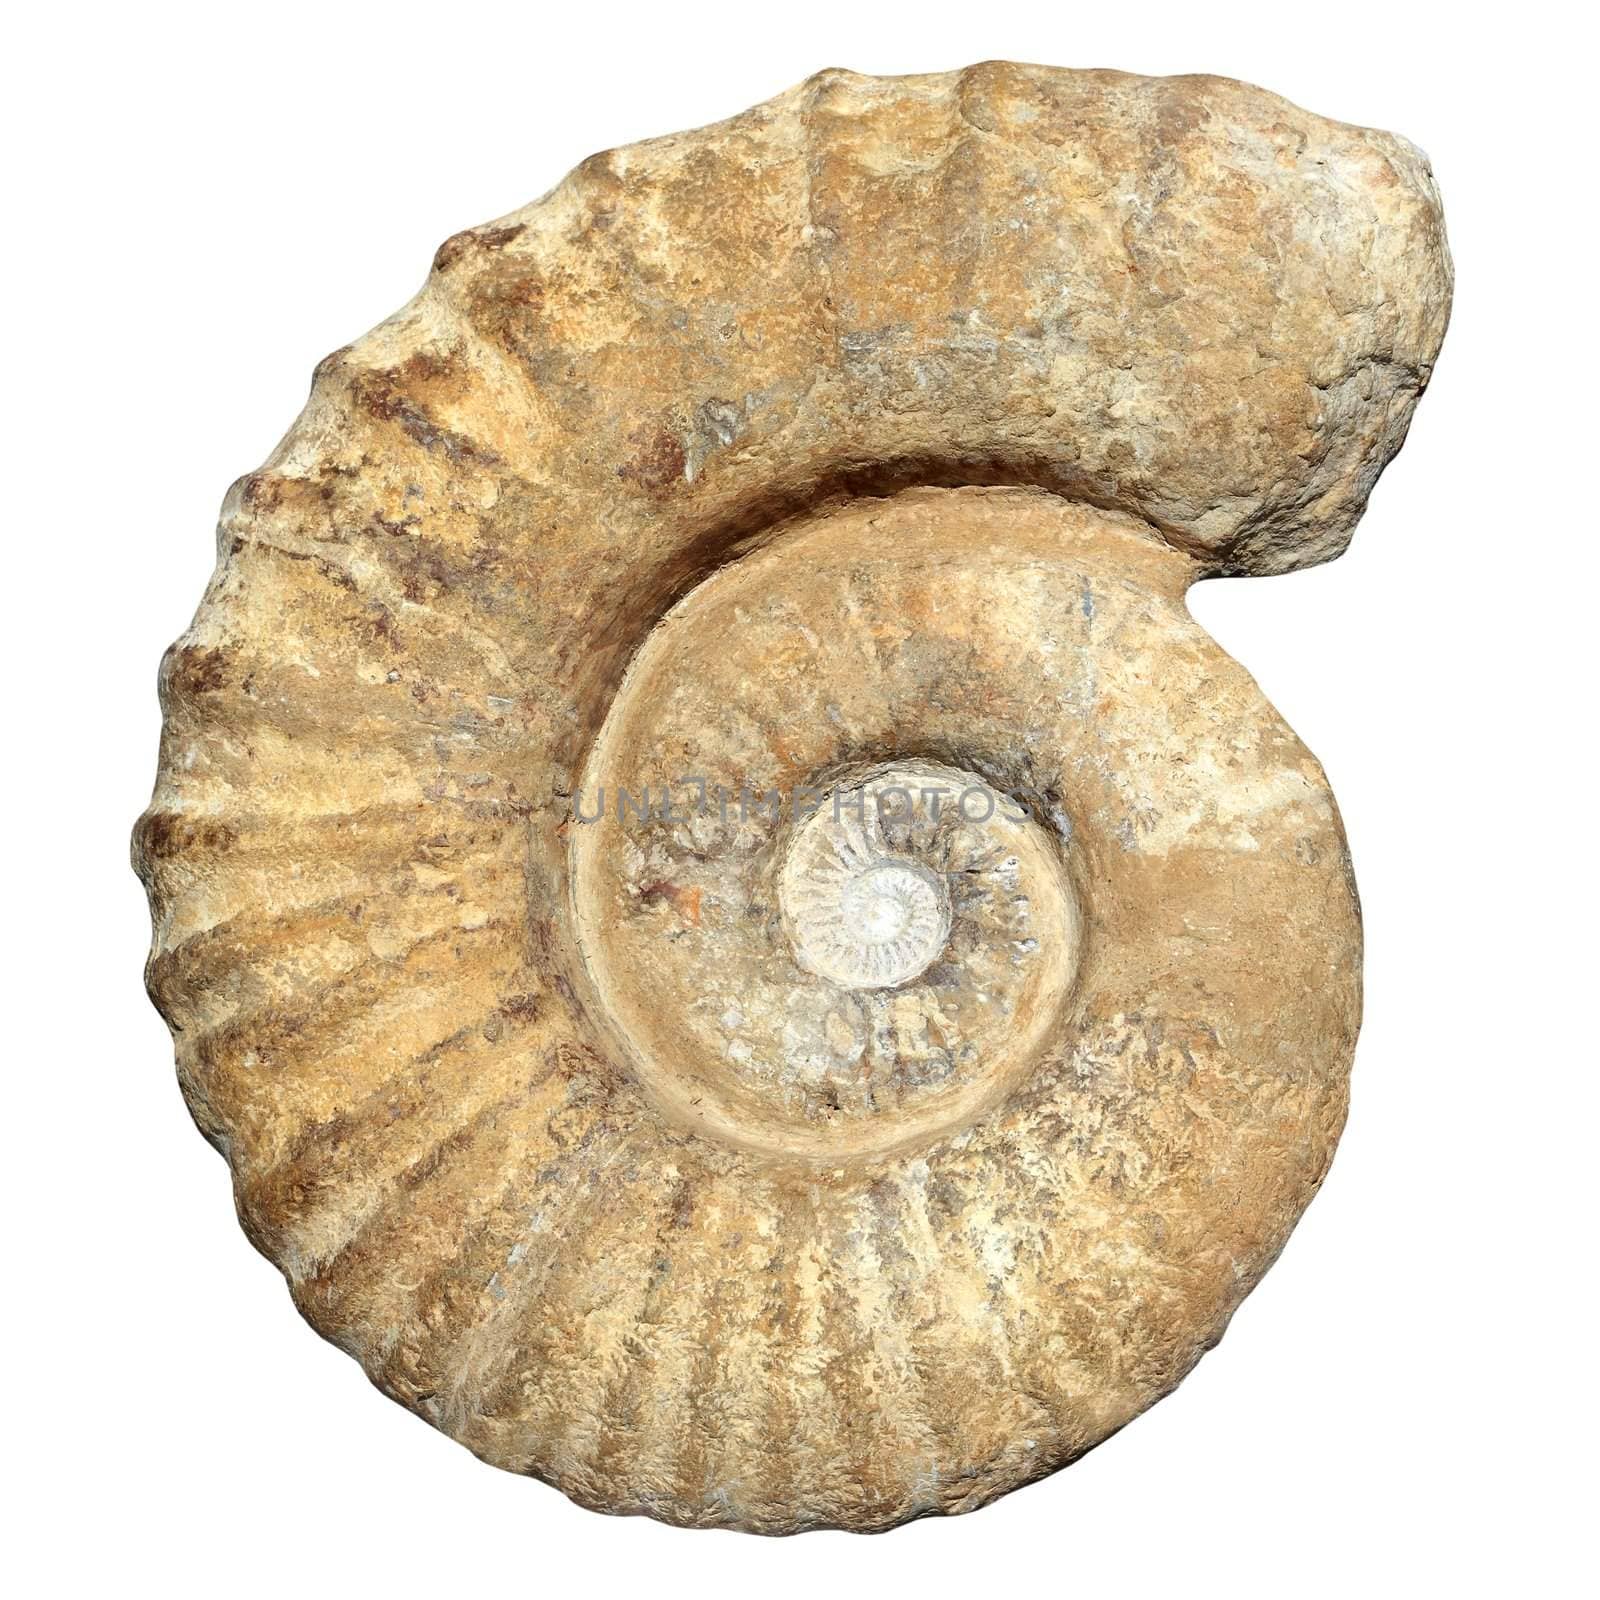 fossil spiral snail stone real ancient petrified shell isolated on white